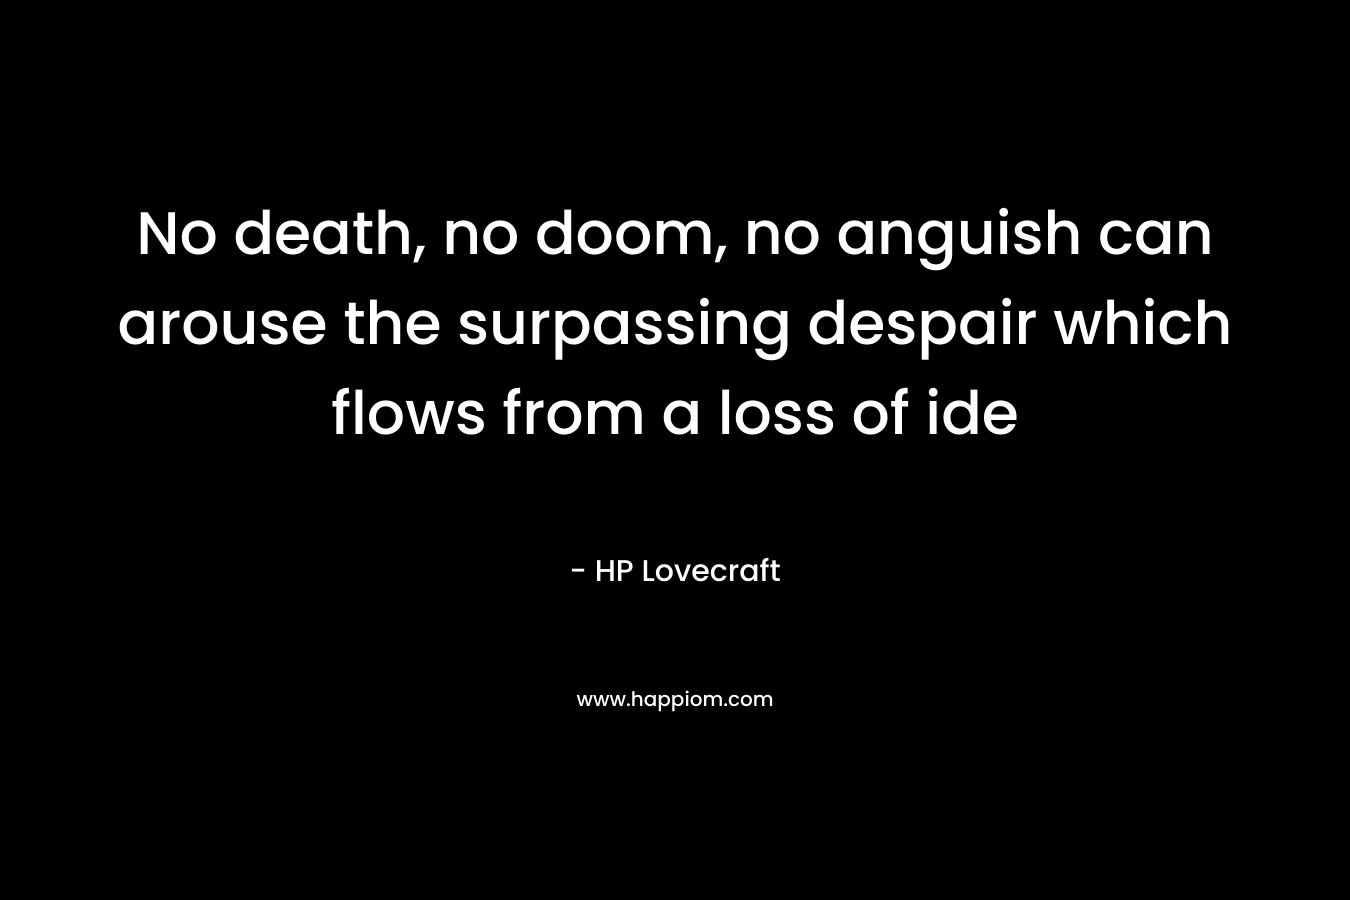 No death, no doom, no anguish can arouse the surpassing despair which flows from a loss of ide